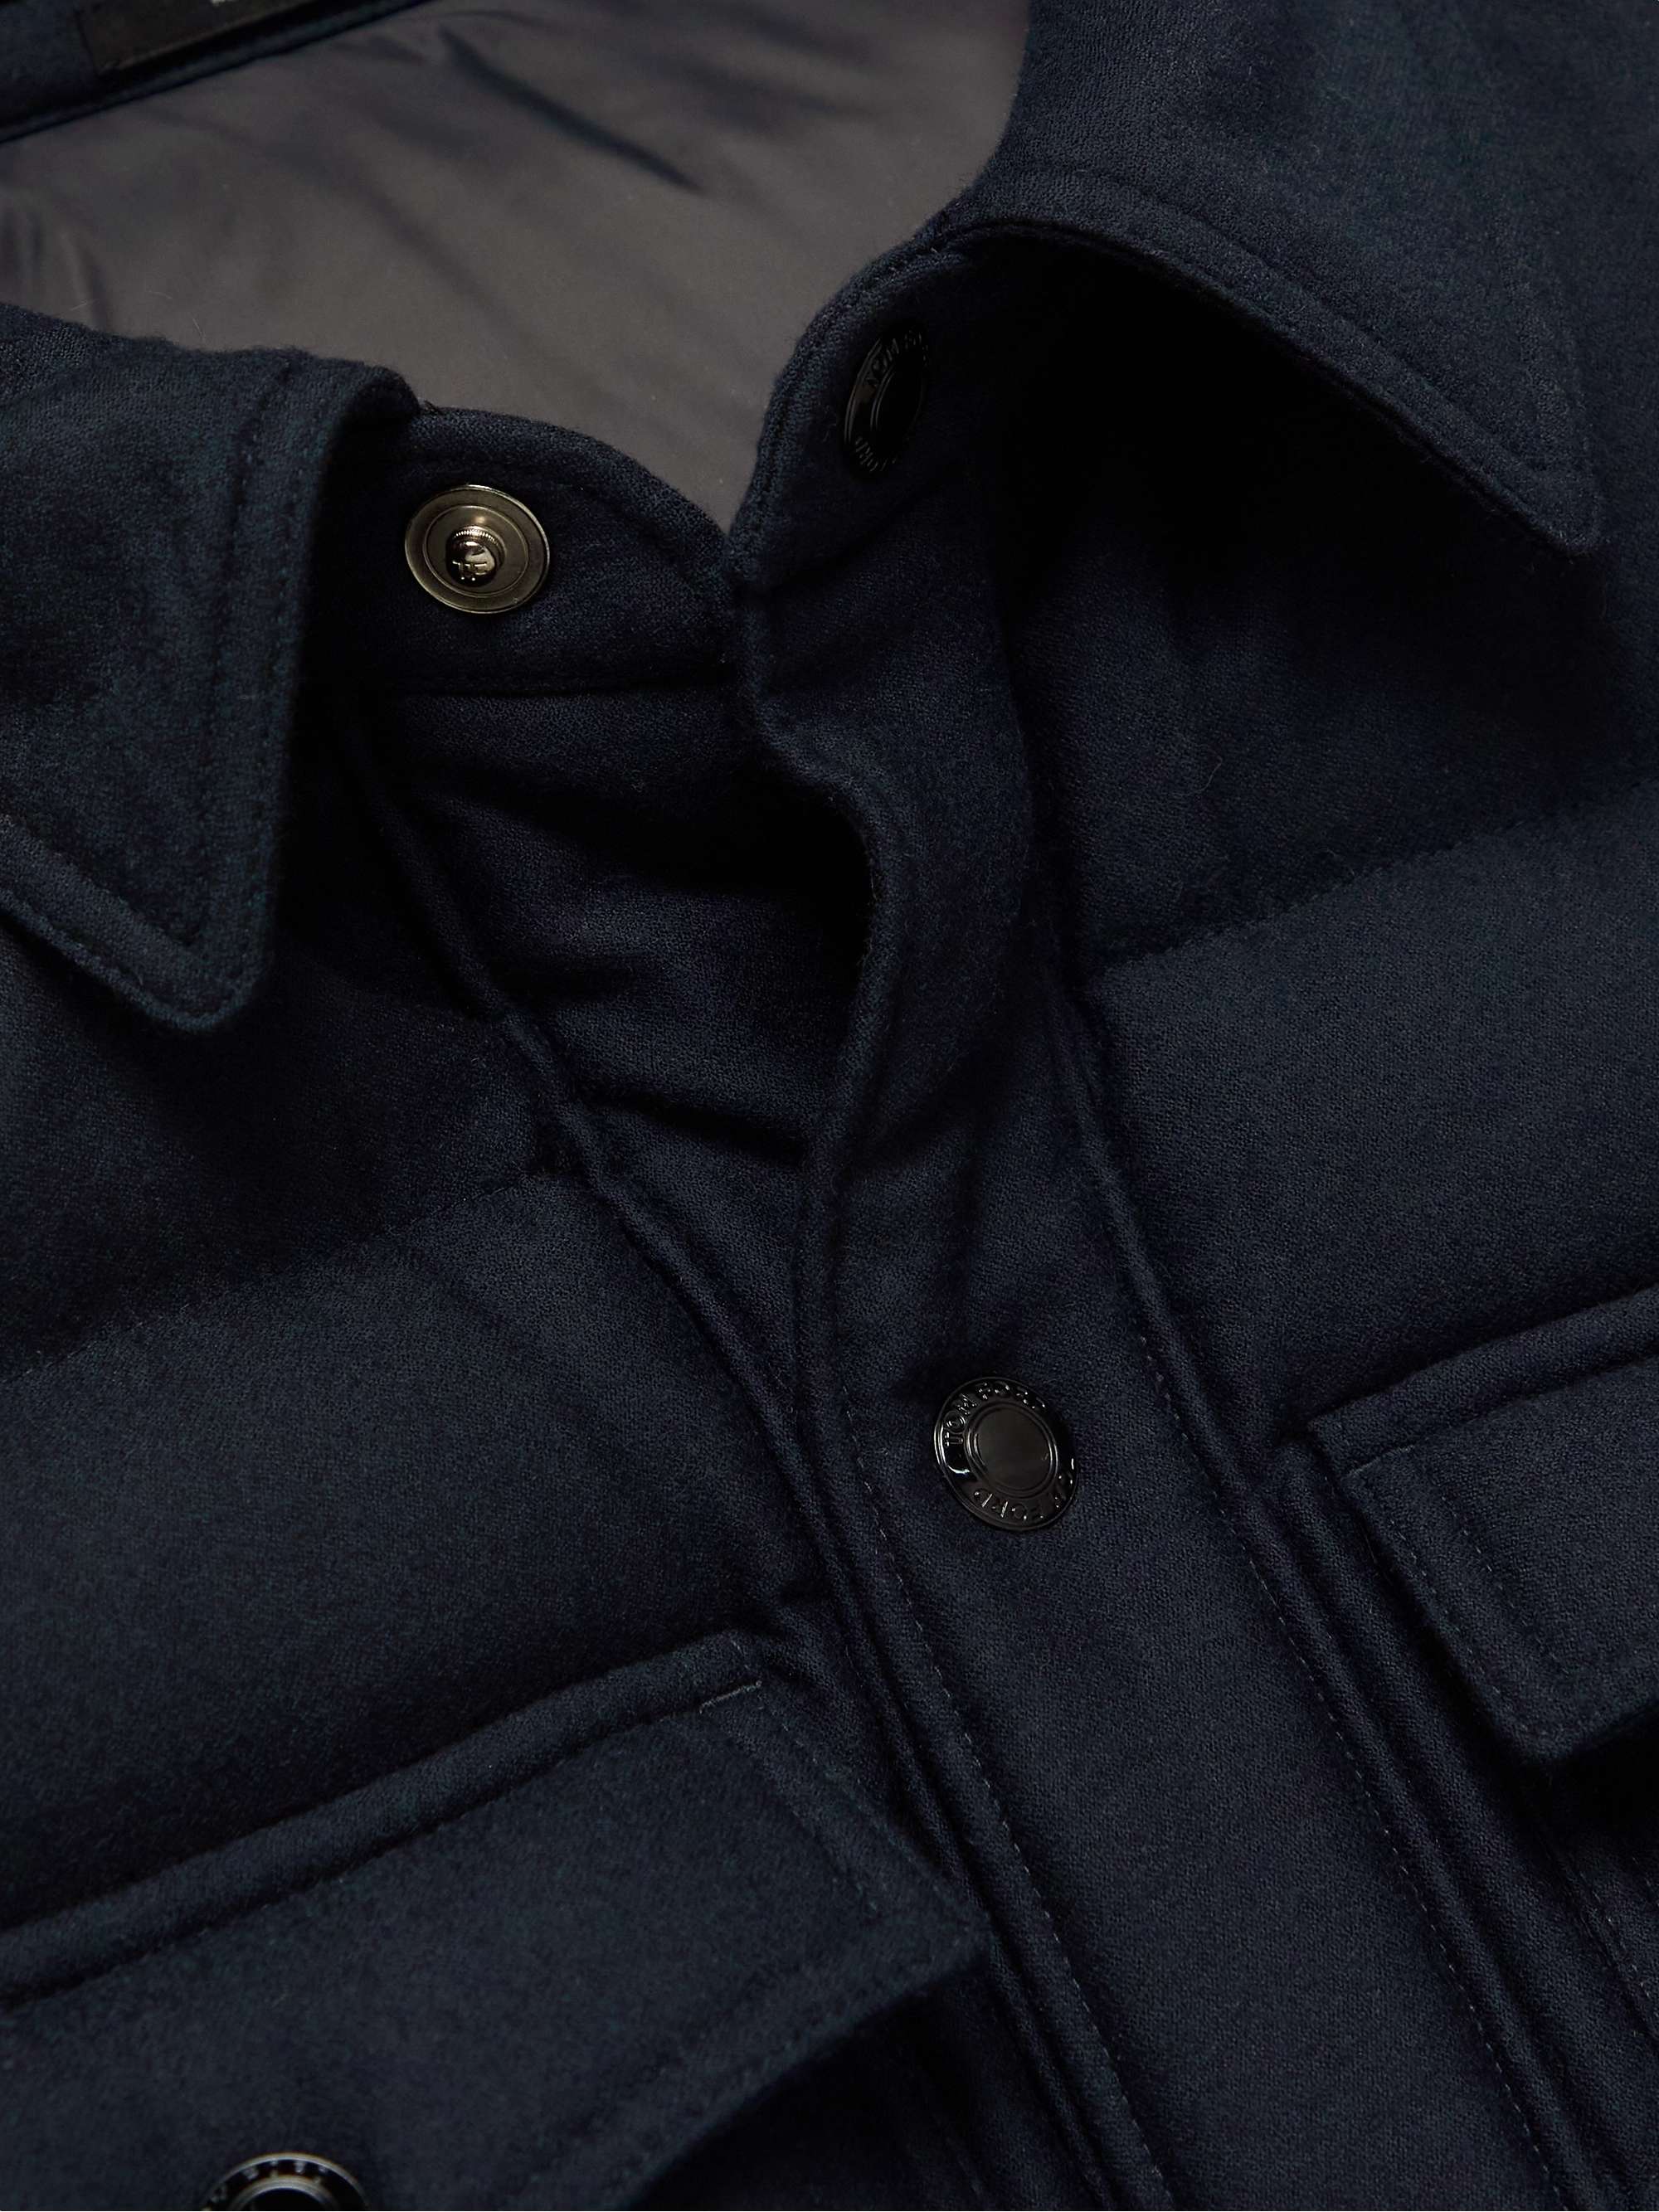 TOM FORD Cashmere and Wool-Bend Down Jacket